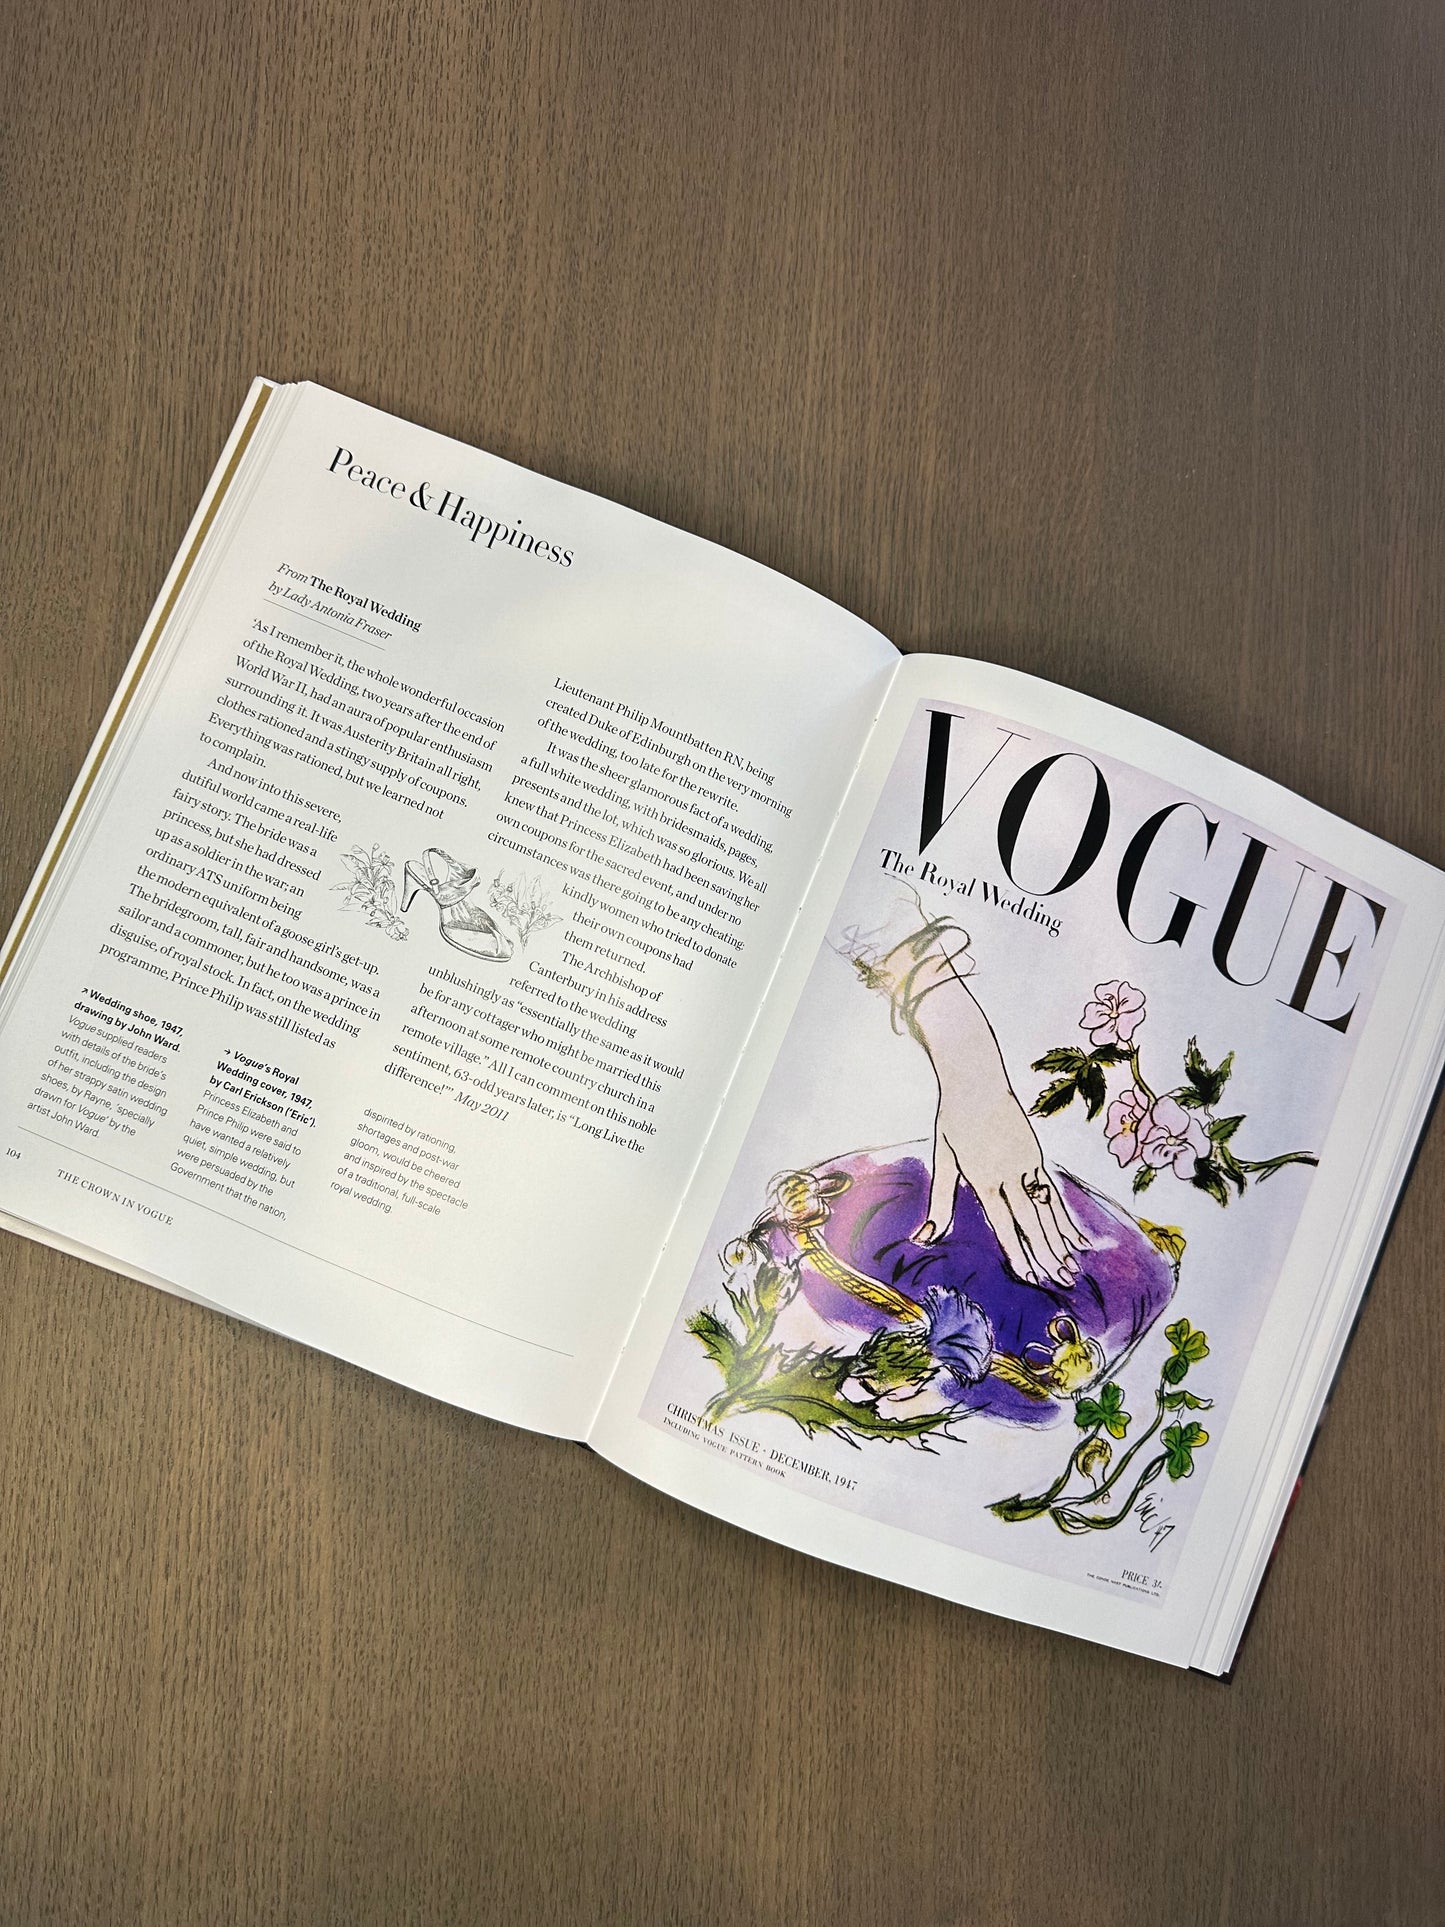 The Crown In Vogue